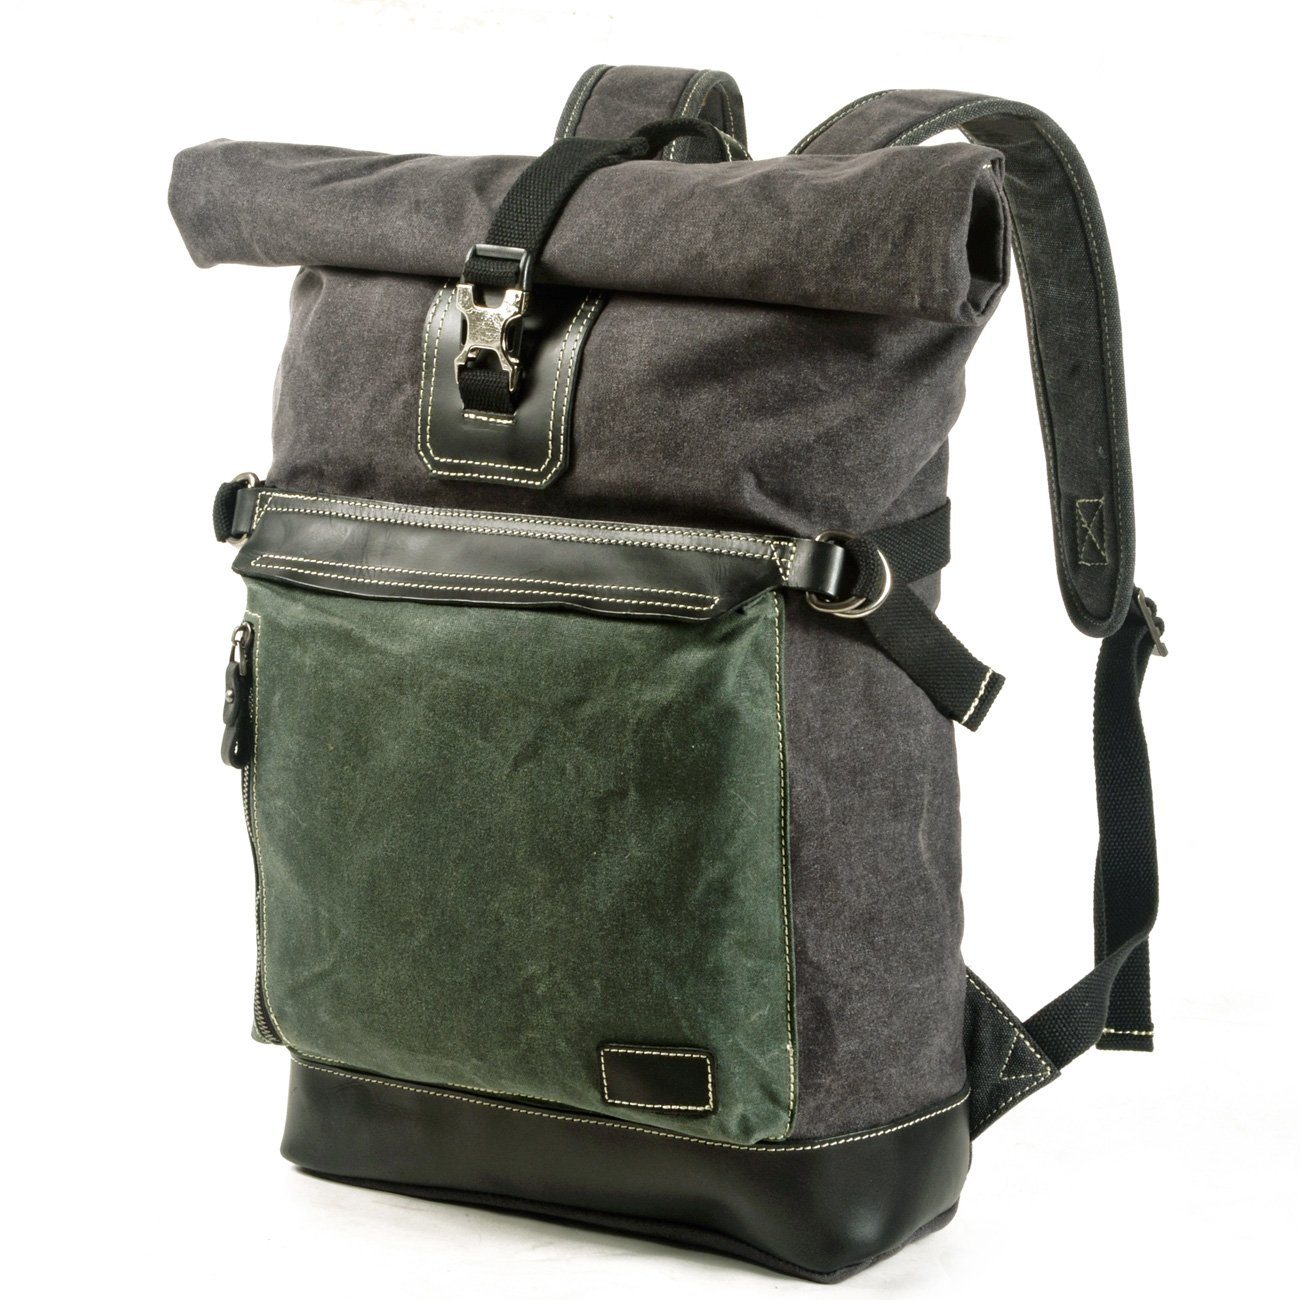 The Trail Master, Waxed Canvas Roll Top Backpack